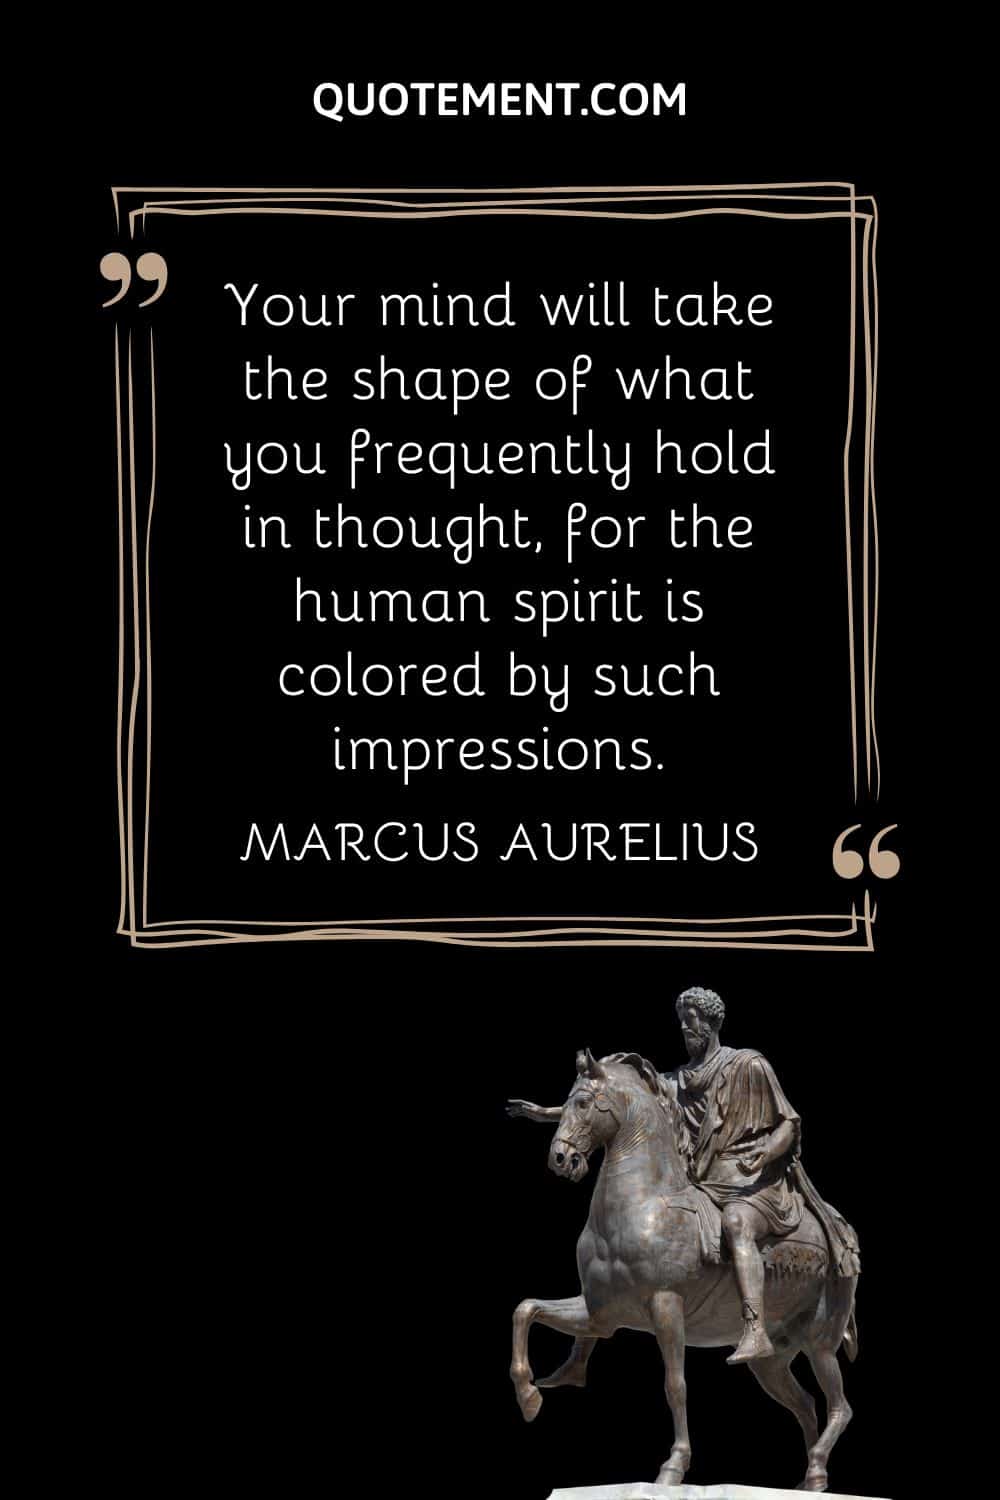 “Your mind will take the shape of what you frequently hold in thought, for the human spirit is colored by such impressions.” — Marcus Aurelius